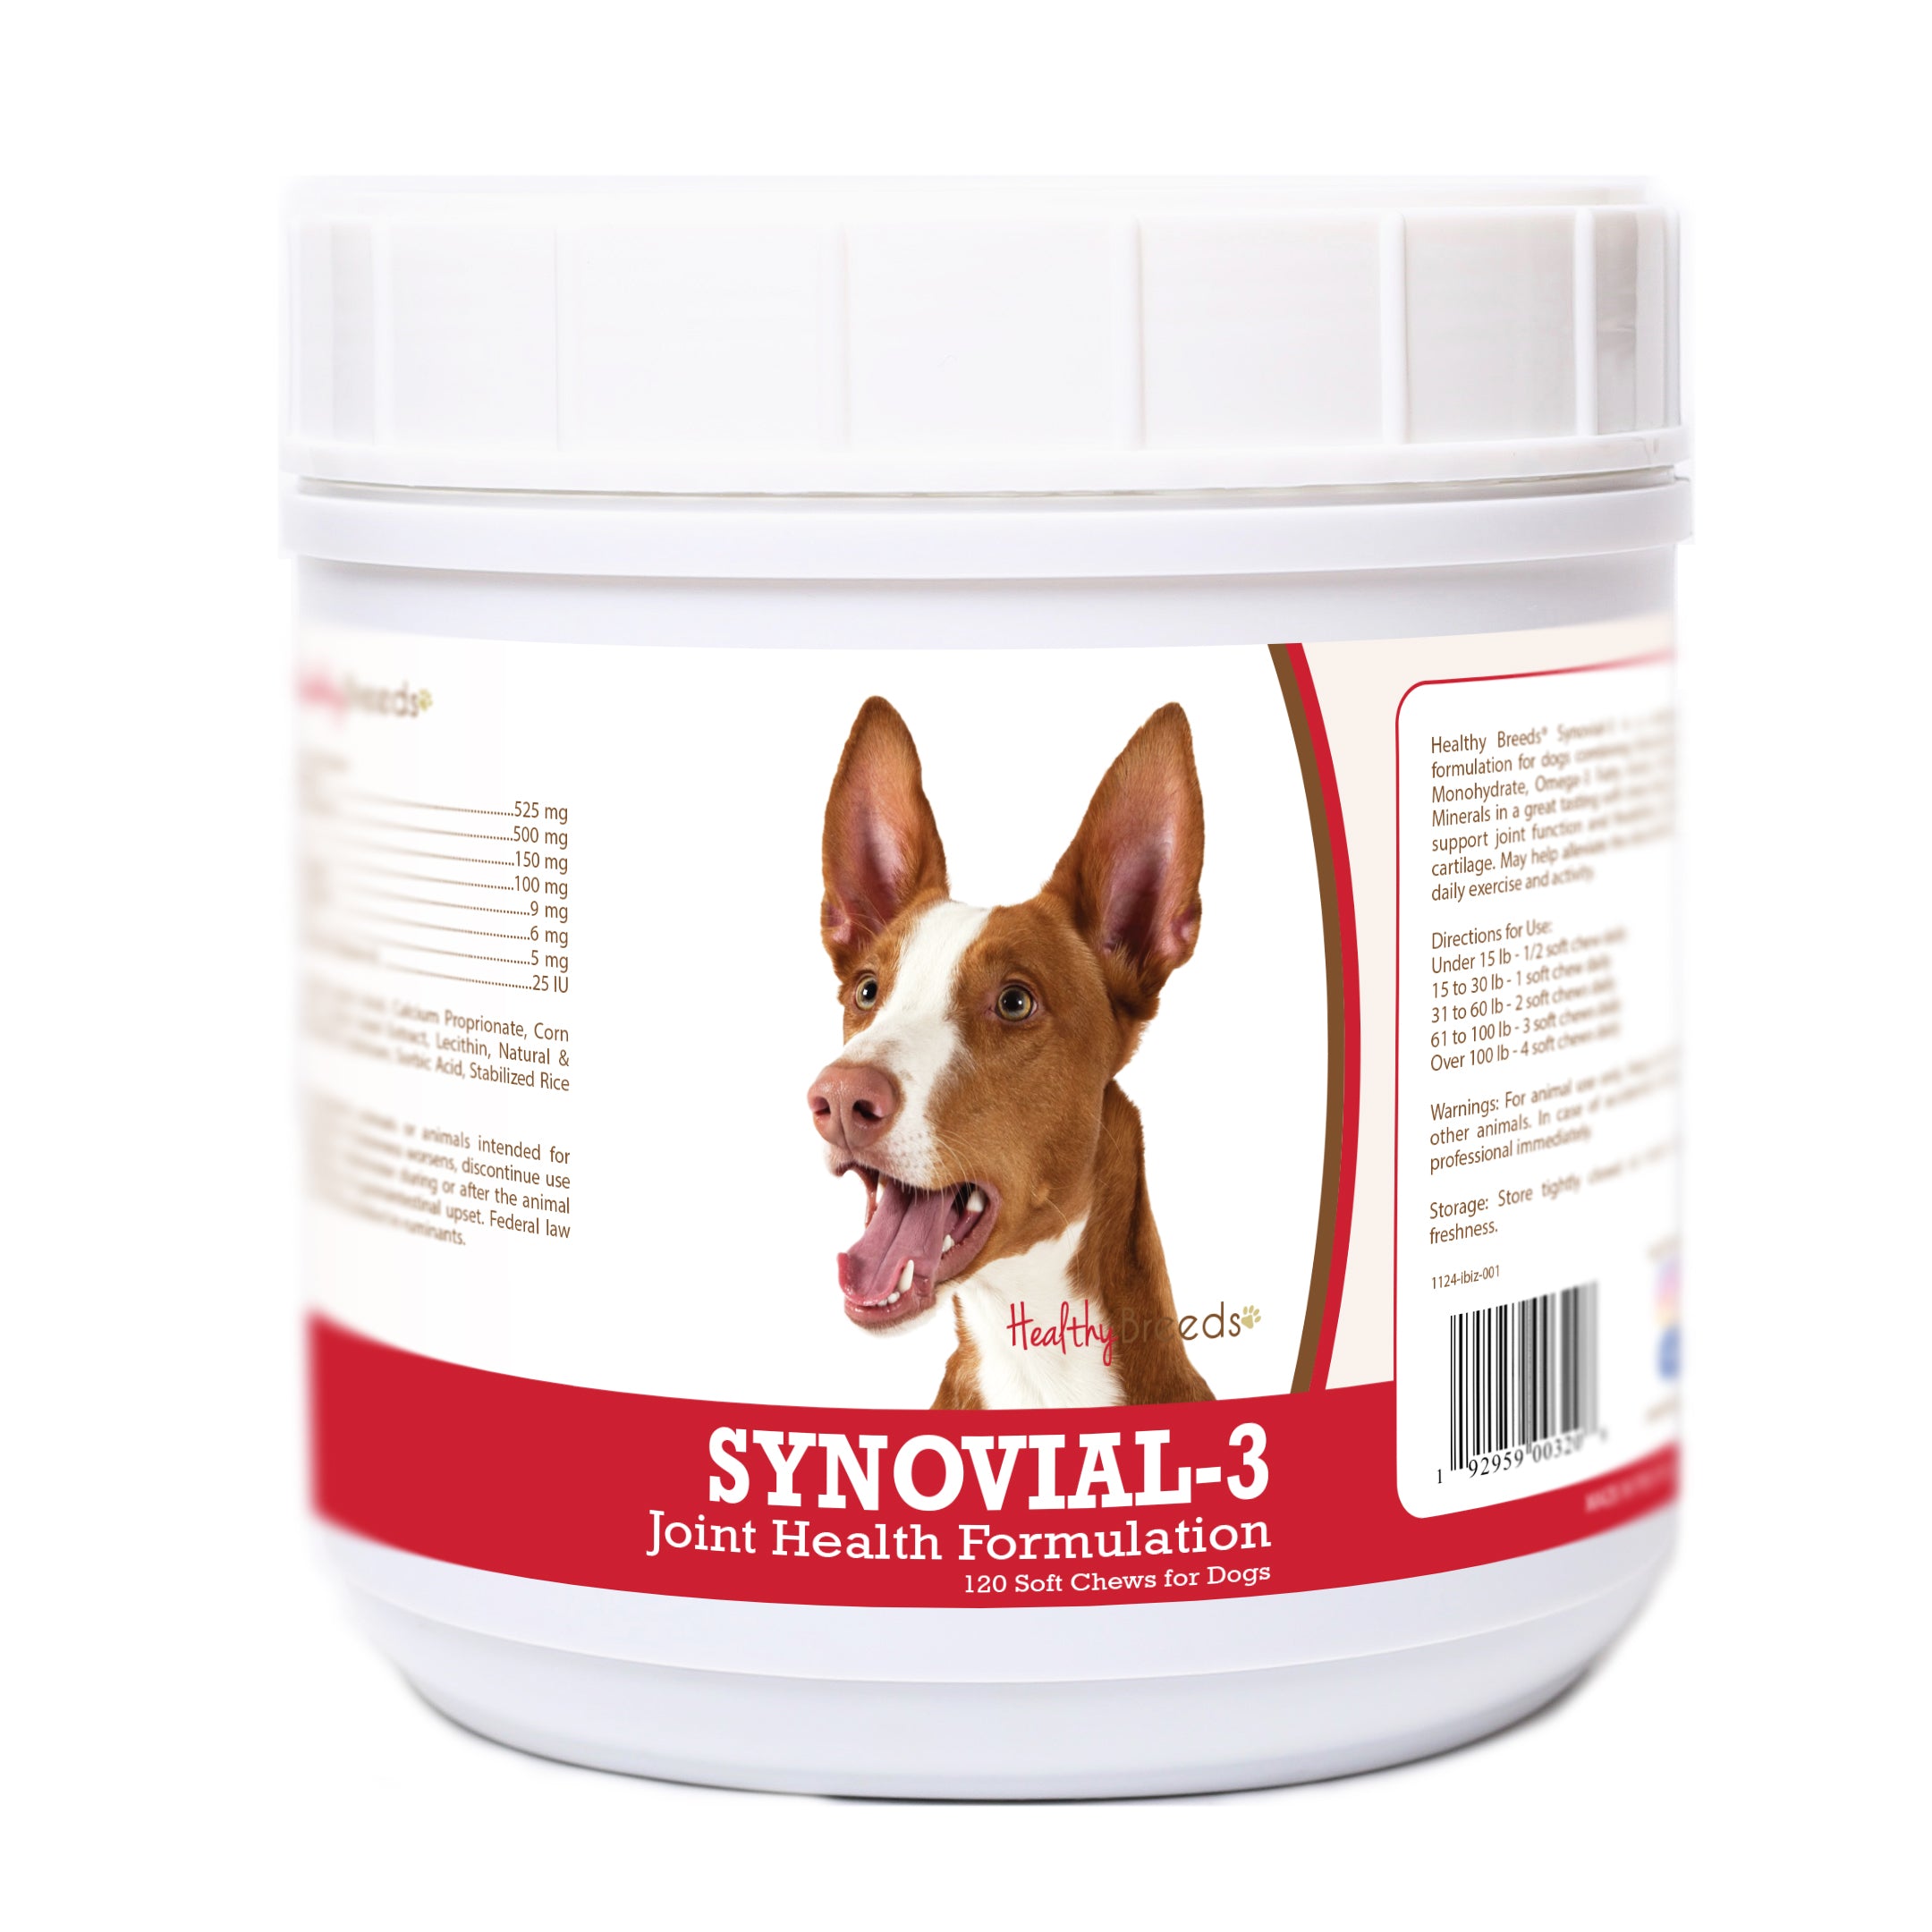 Ibizan Hound Synovial-3 Joint Health Formulation Soft Chews 120 Count